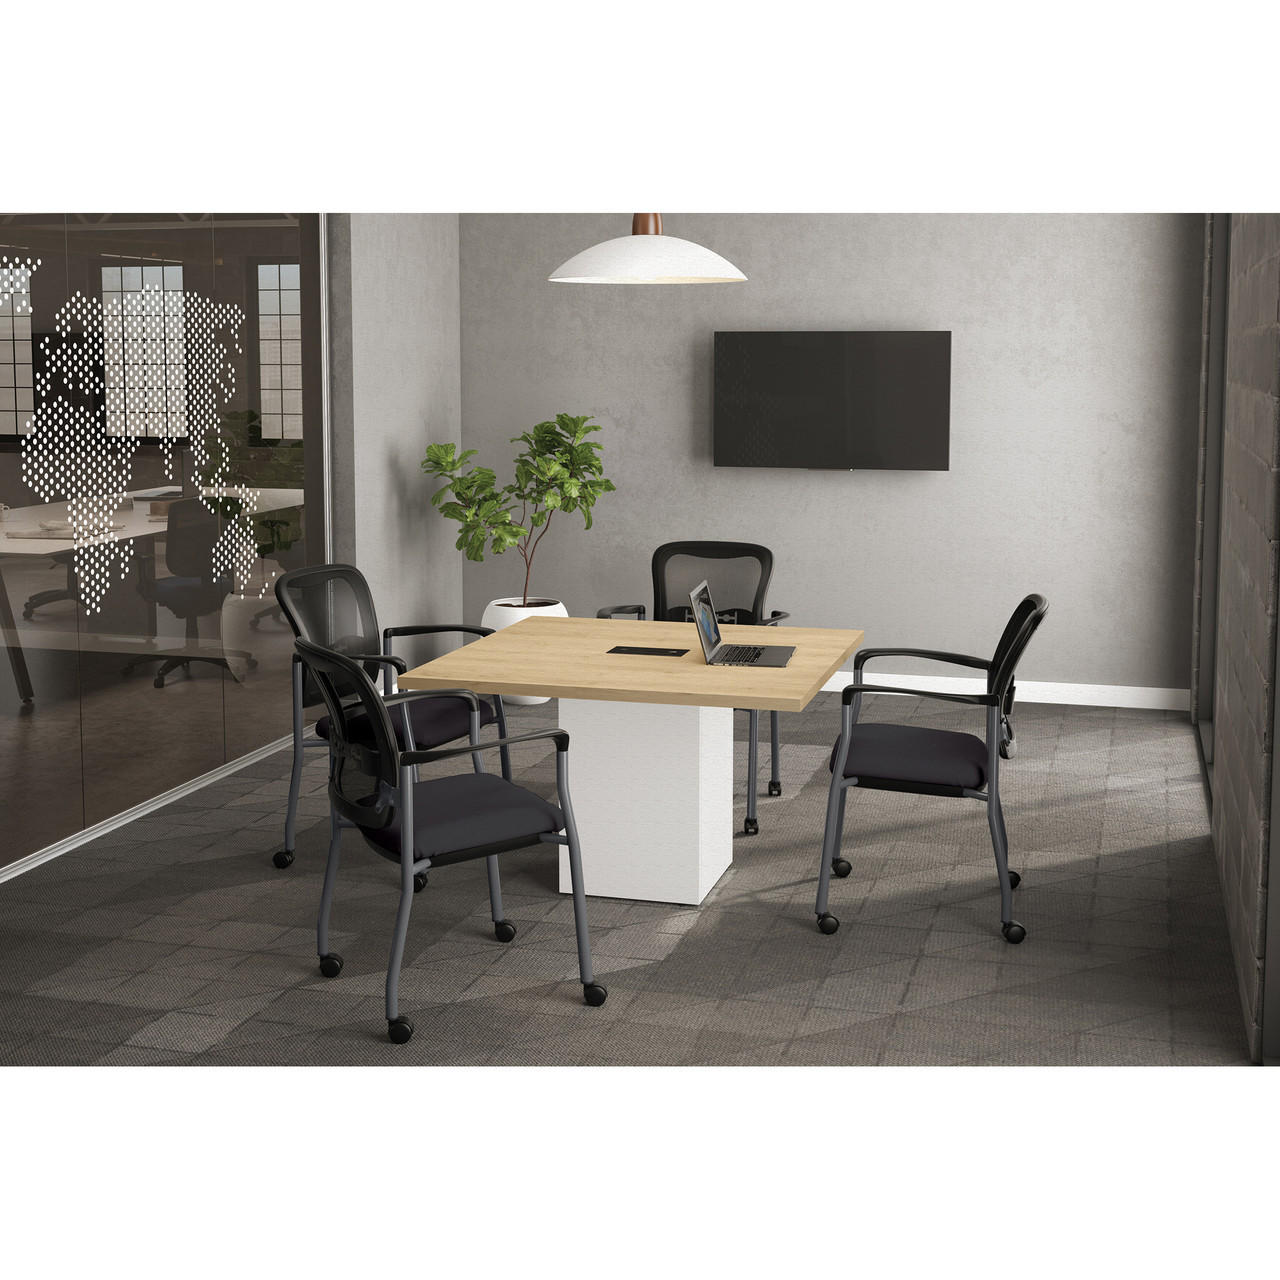  Office Source OS Laminate Square Meeting Table OSC27 (Available with Power!) 